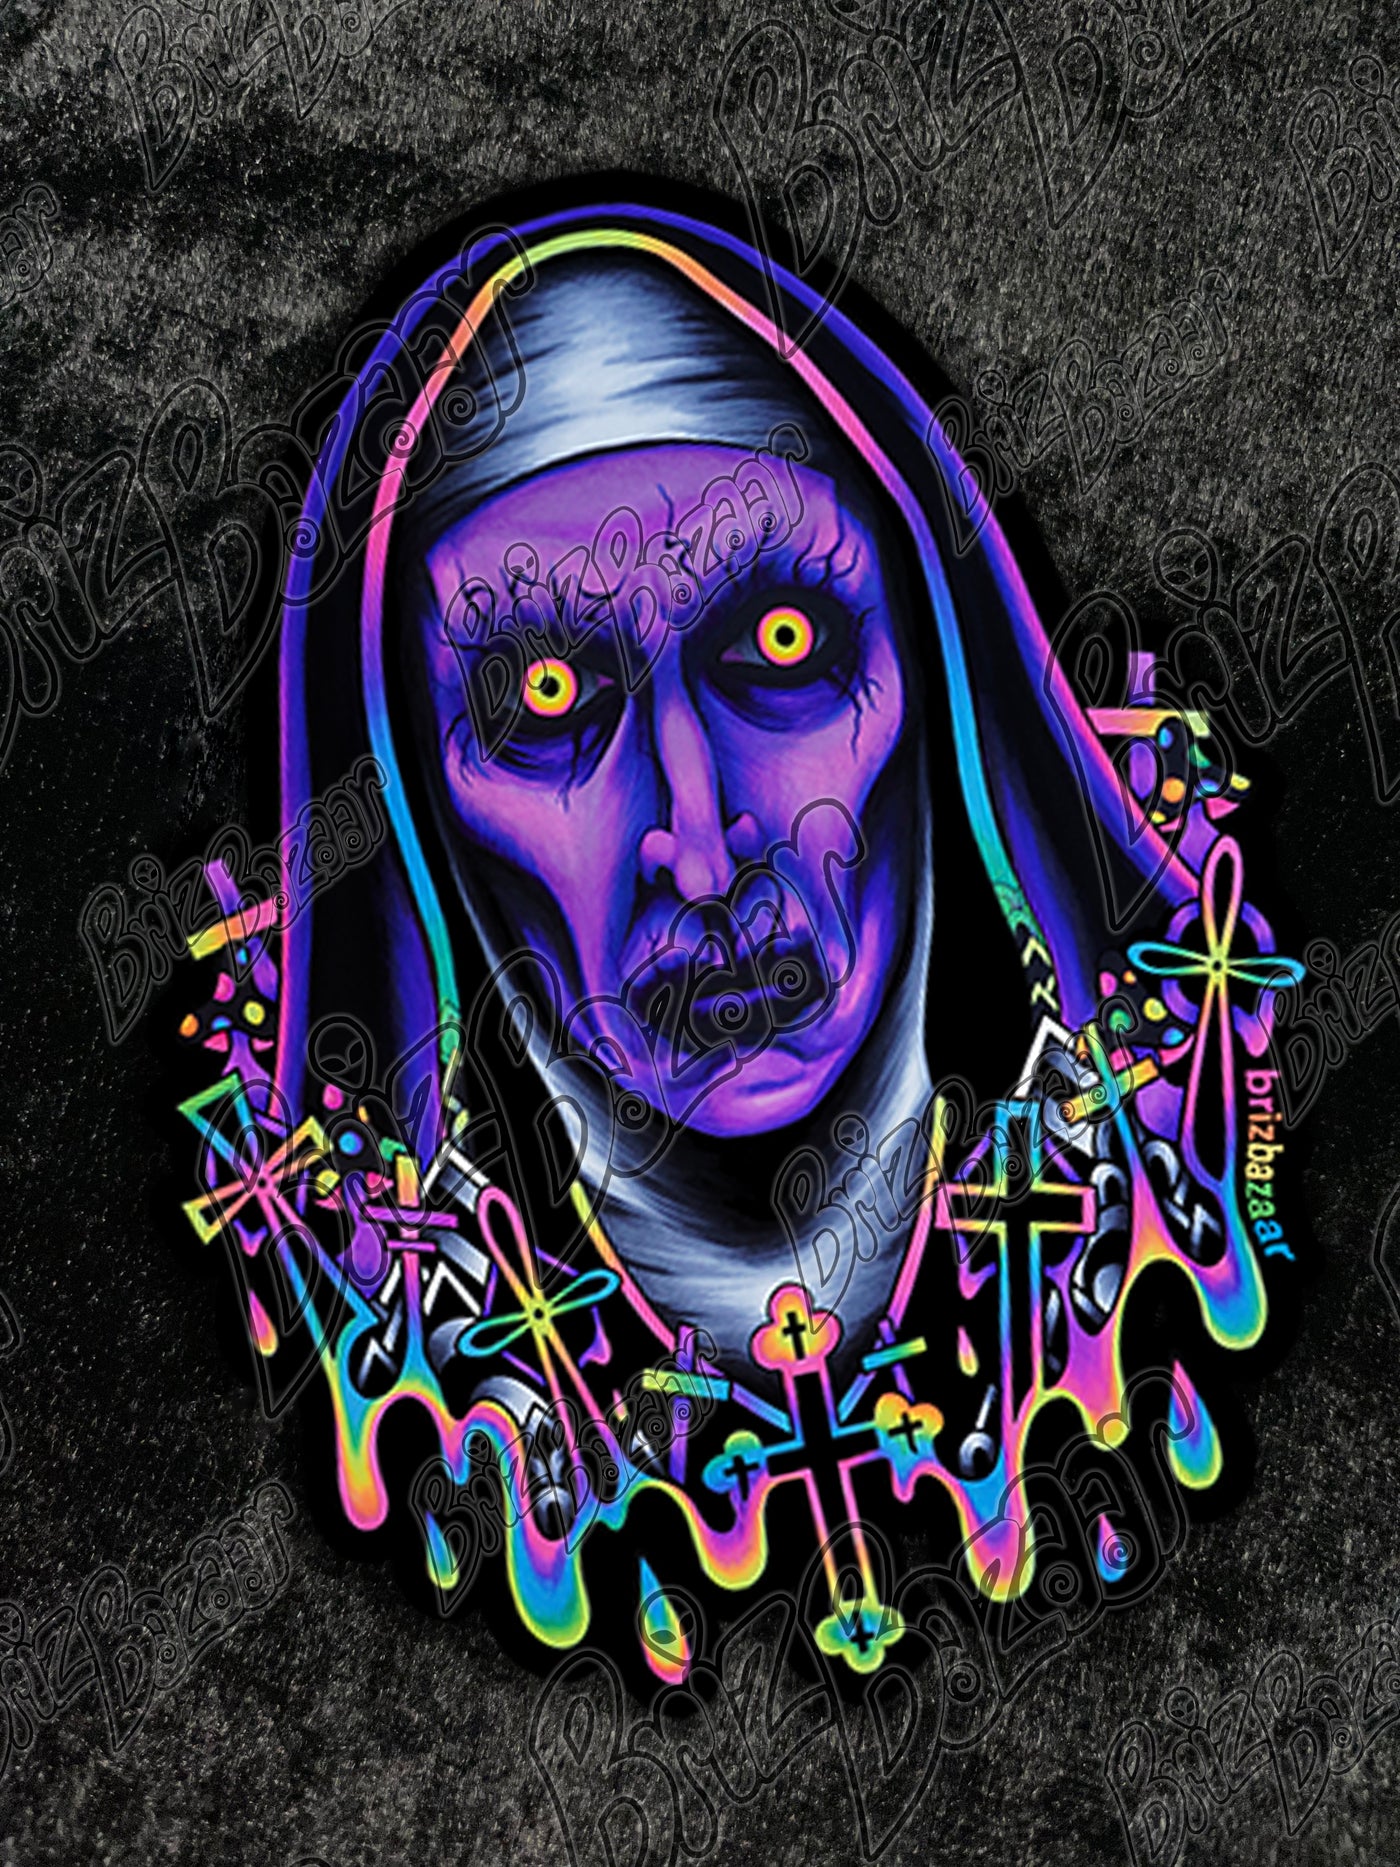 Vinyl Sticker of Twizted Sister